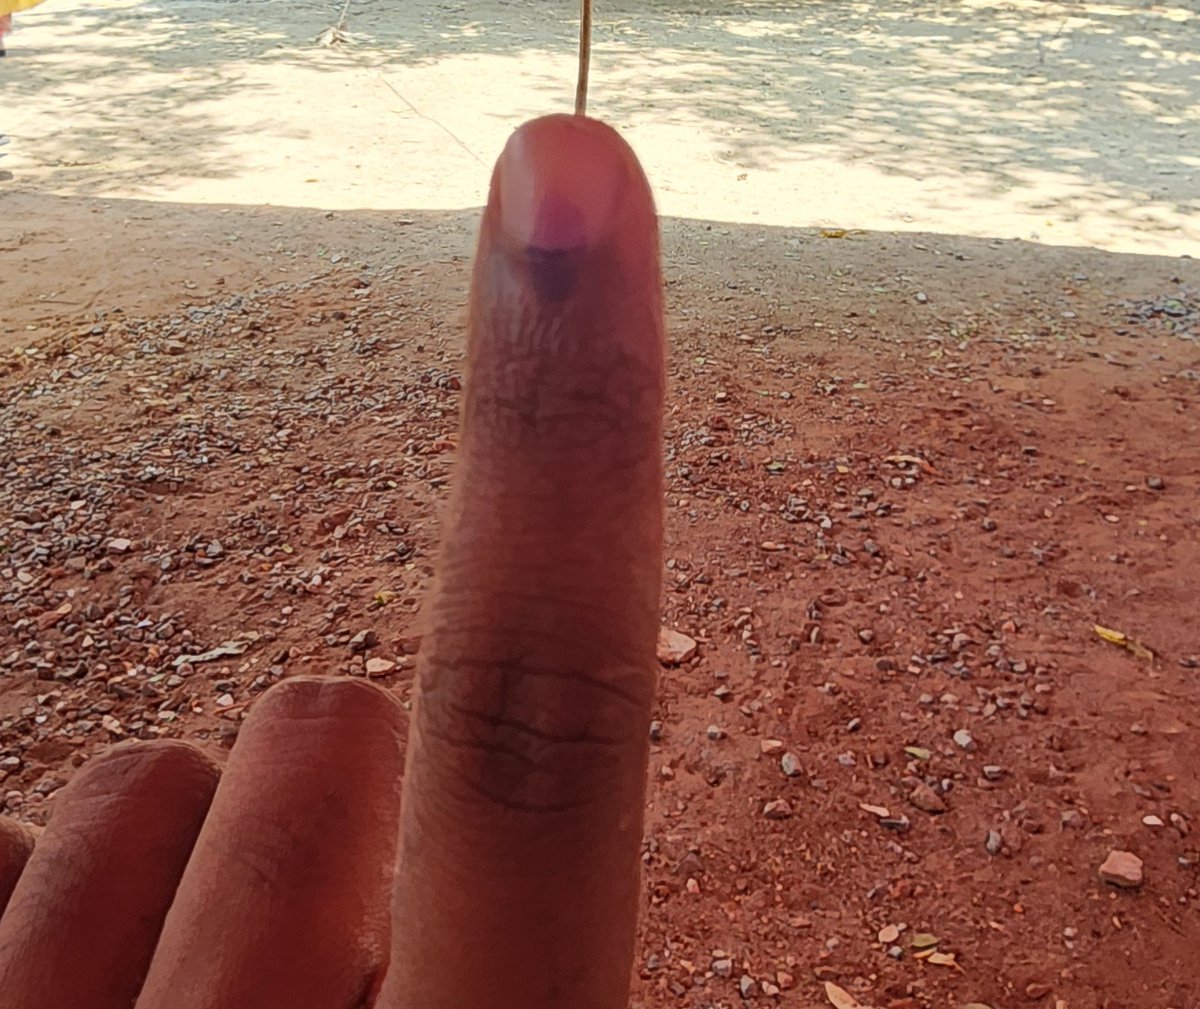 I Casted My Vote to my Gutsy Leader Who always Stood for Poor People ❤